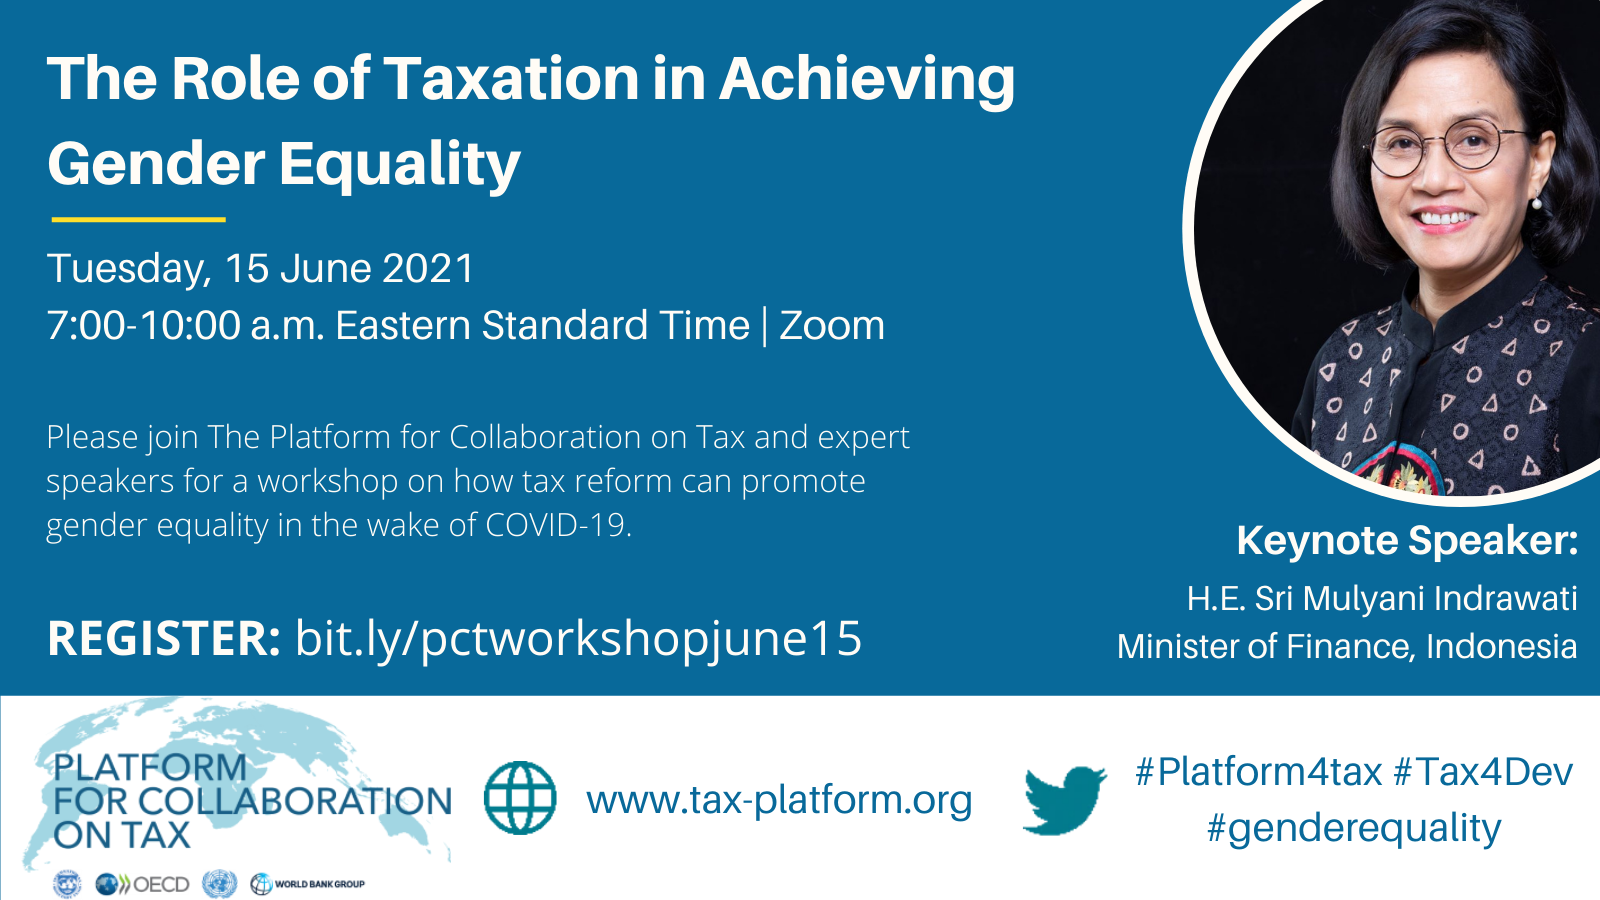 Event image card for the PCT workshop on the role of taxation in achieving gender equality